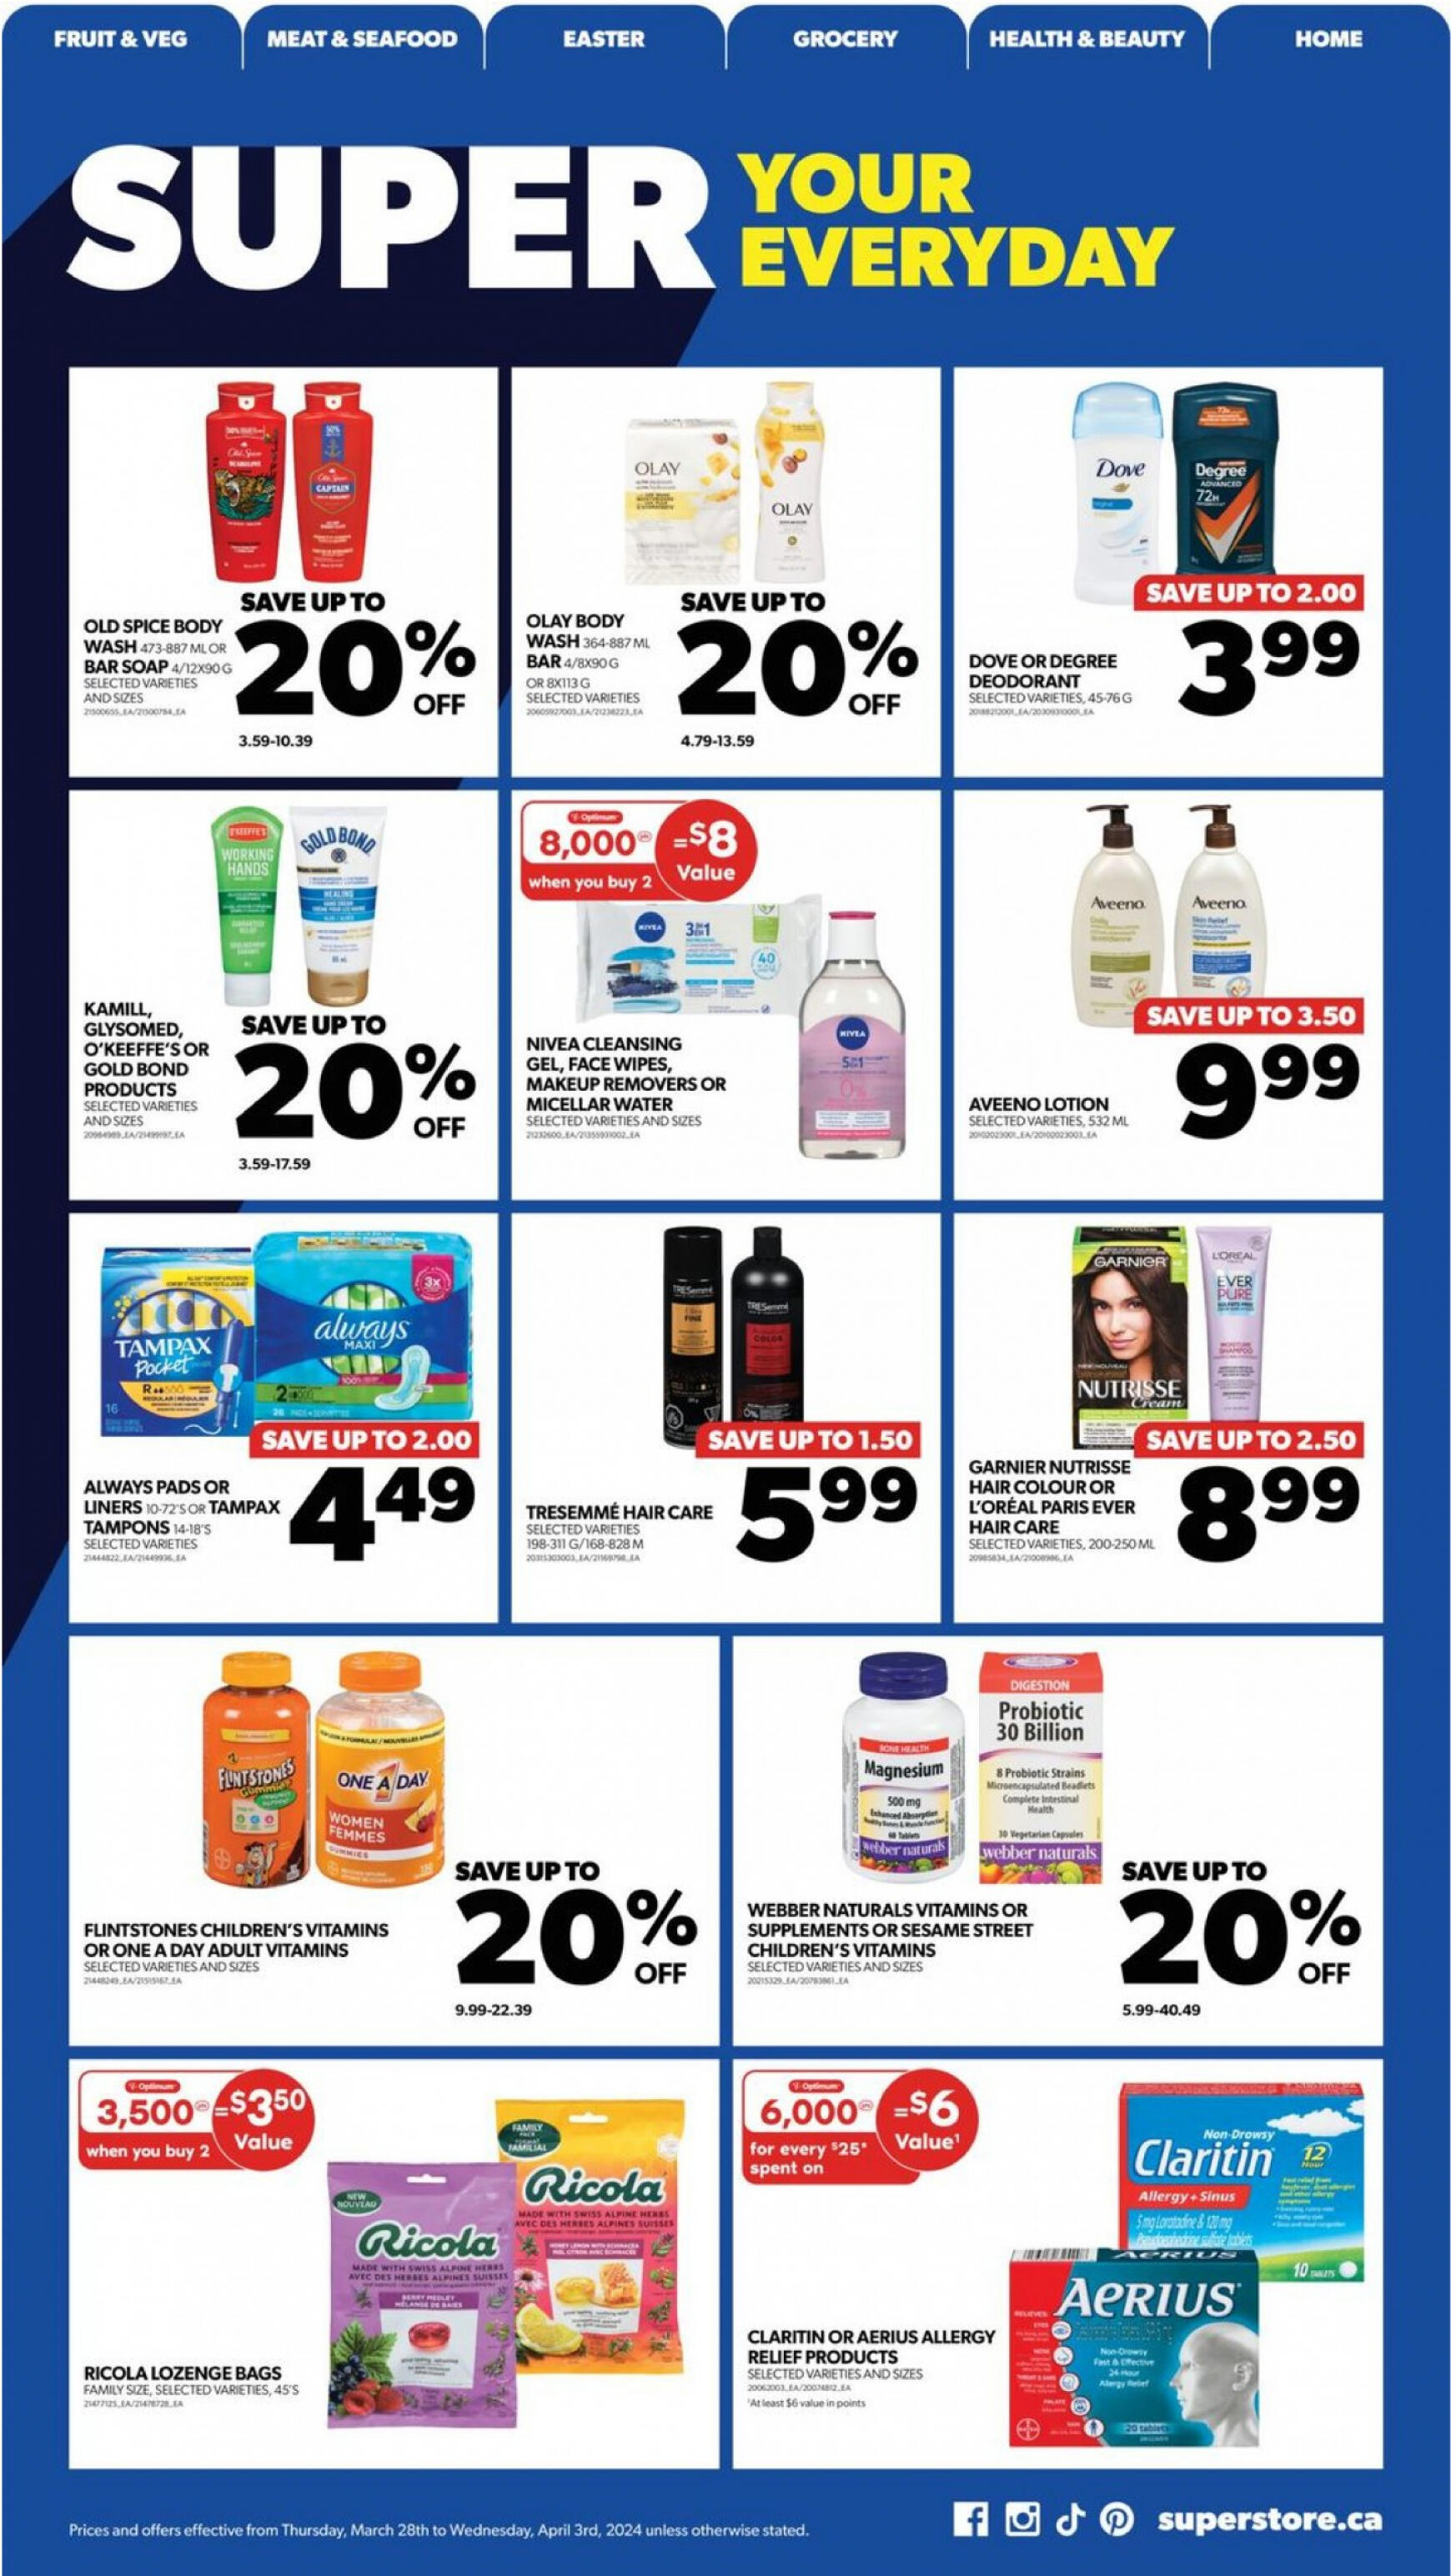 real-canadian-superstore - Real Canadian Superstore flyer current 28.03. - 03.04. - page: 26